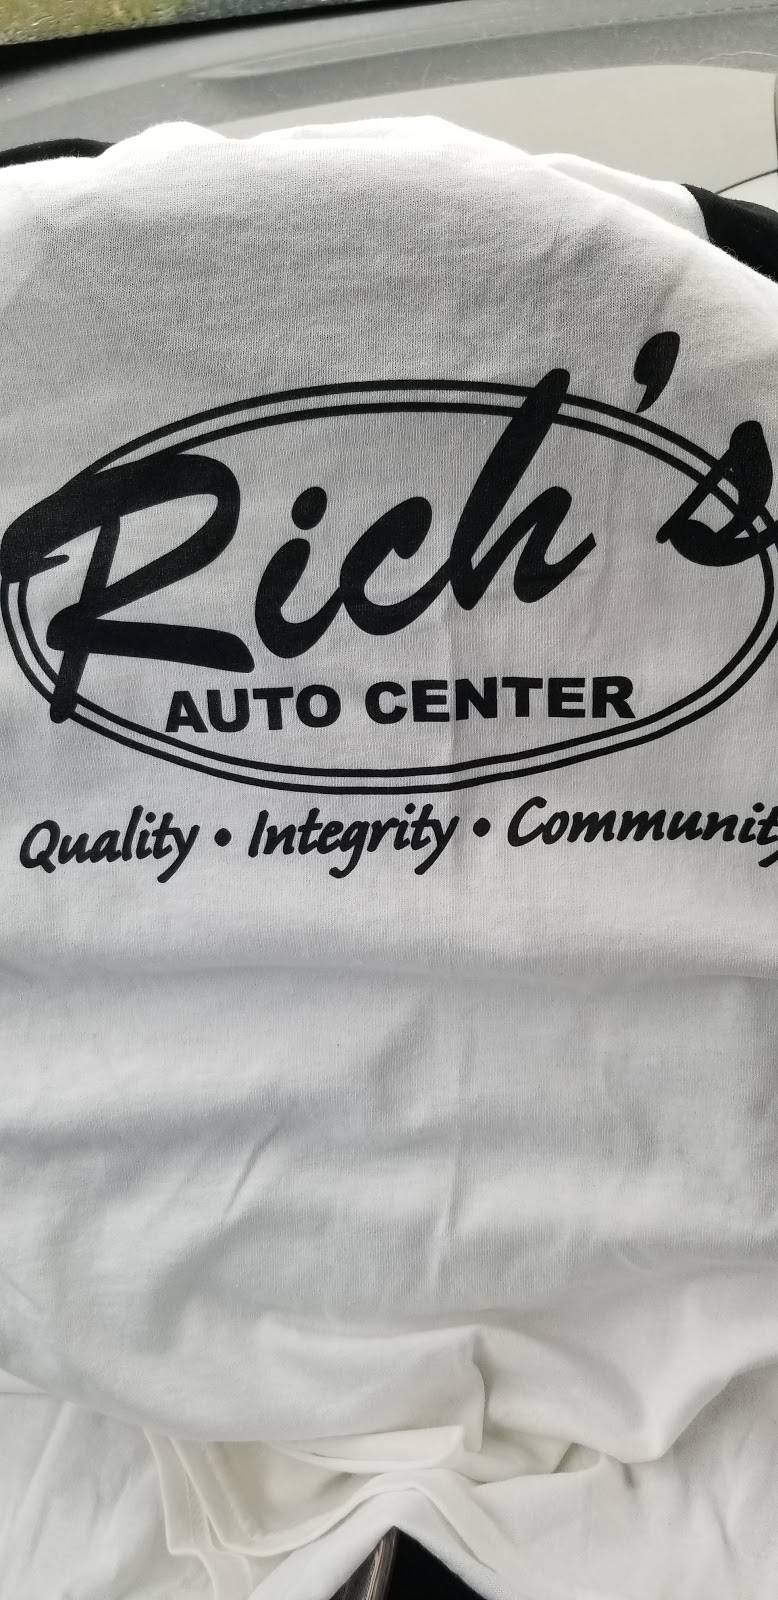 Richs Auto Center | 2135 Sand Point Rd, Fort Wayne, IN 46809 | Phone: (260) 747-8145